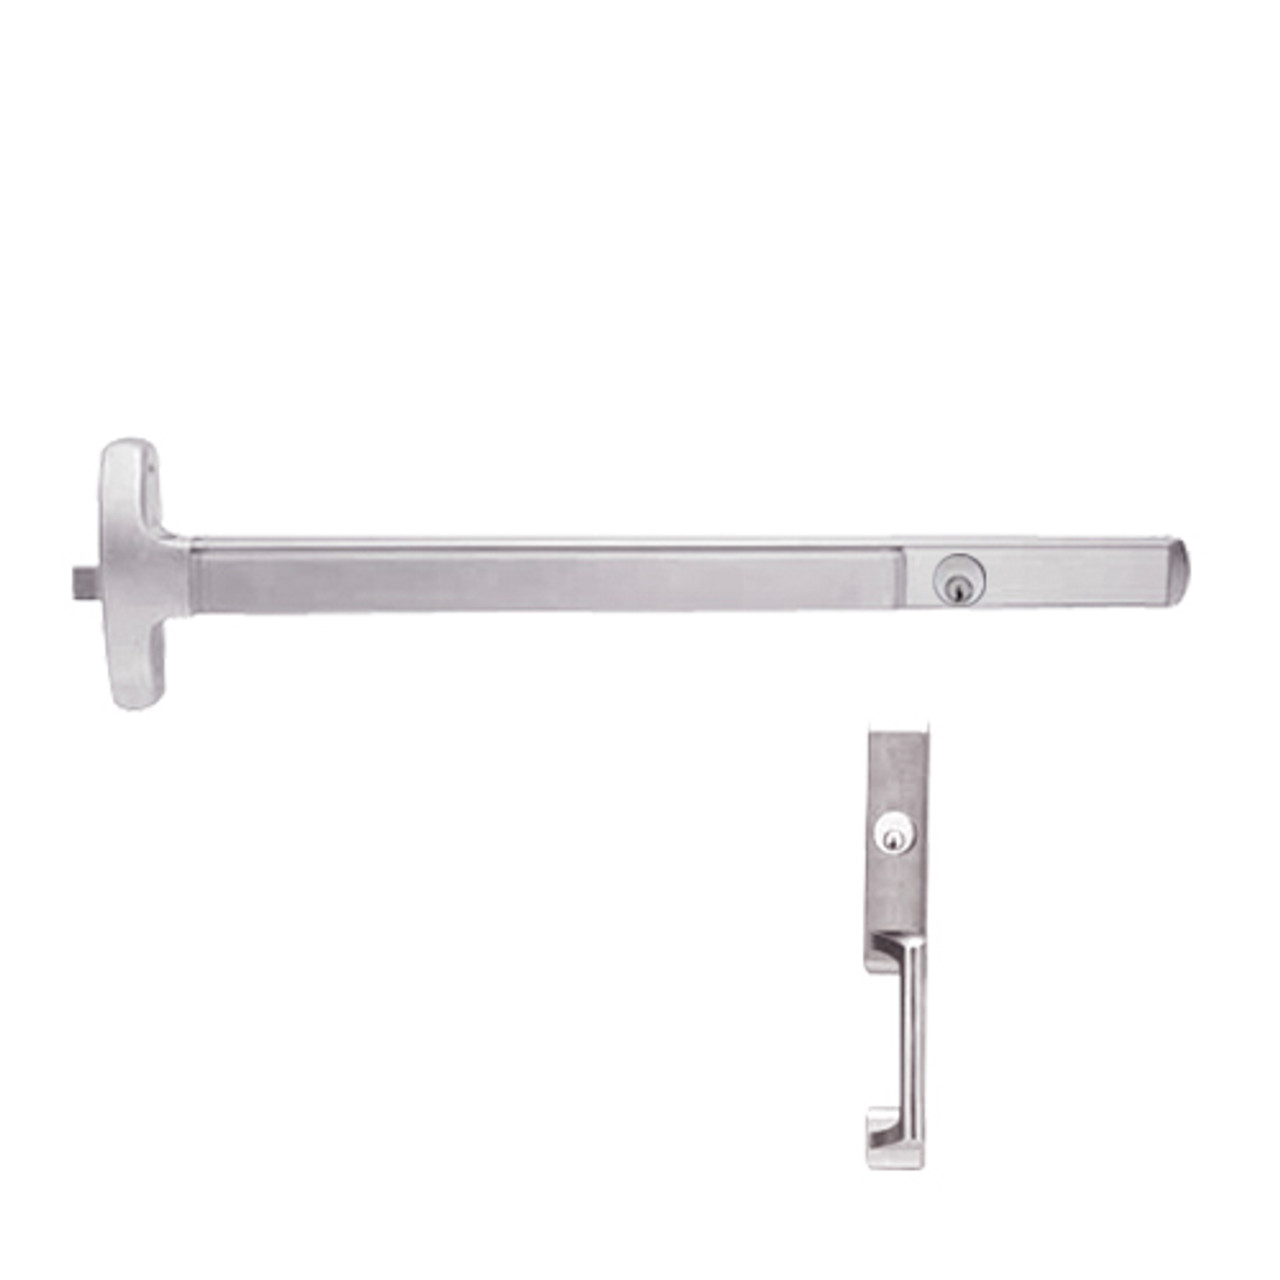 CD24-R-NL-US32-3-LHR Falcon Exit Device in Polished Stainless Steel